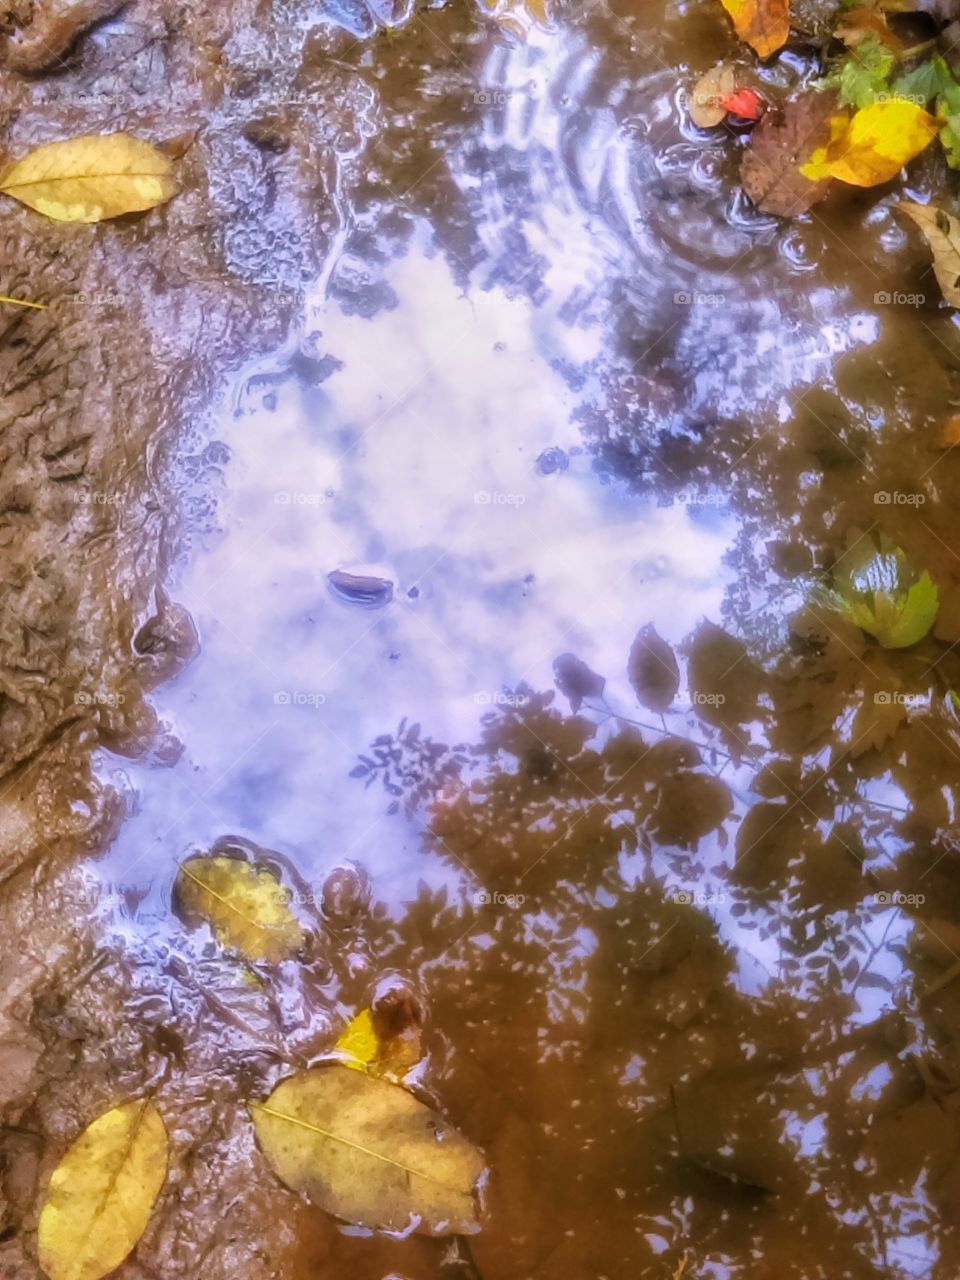 A puddle after the rain